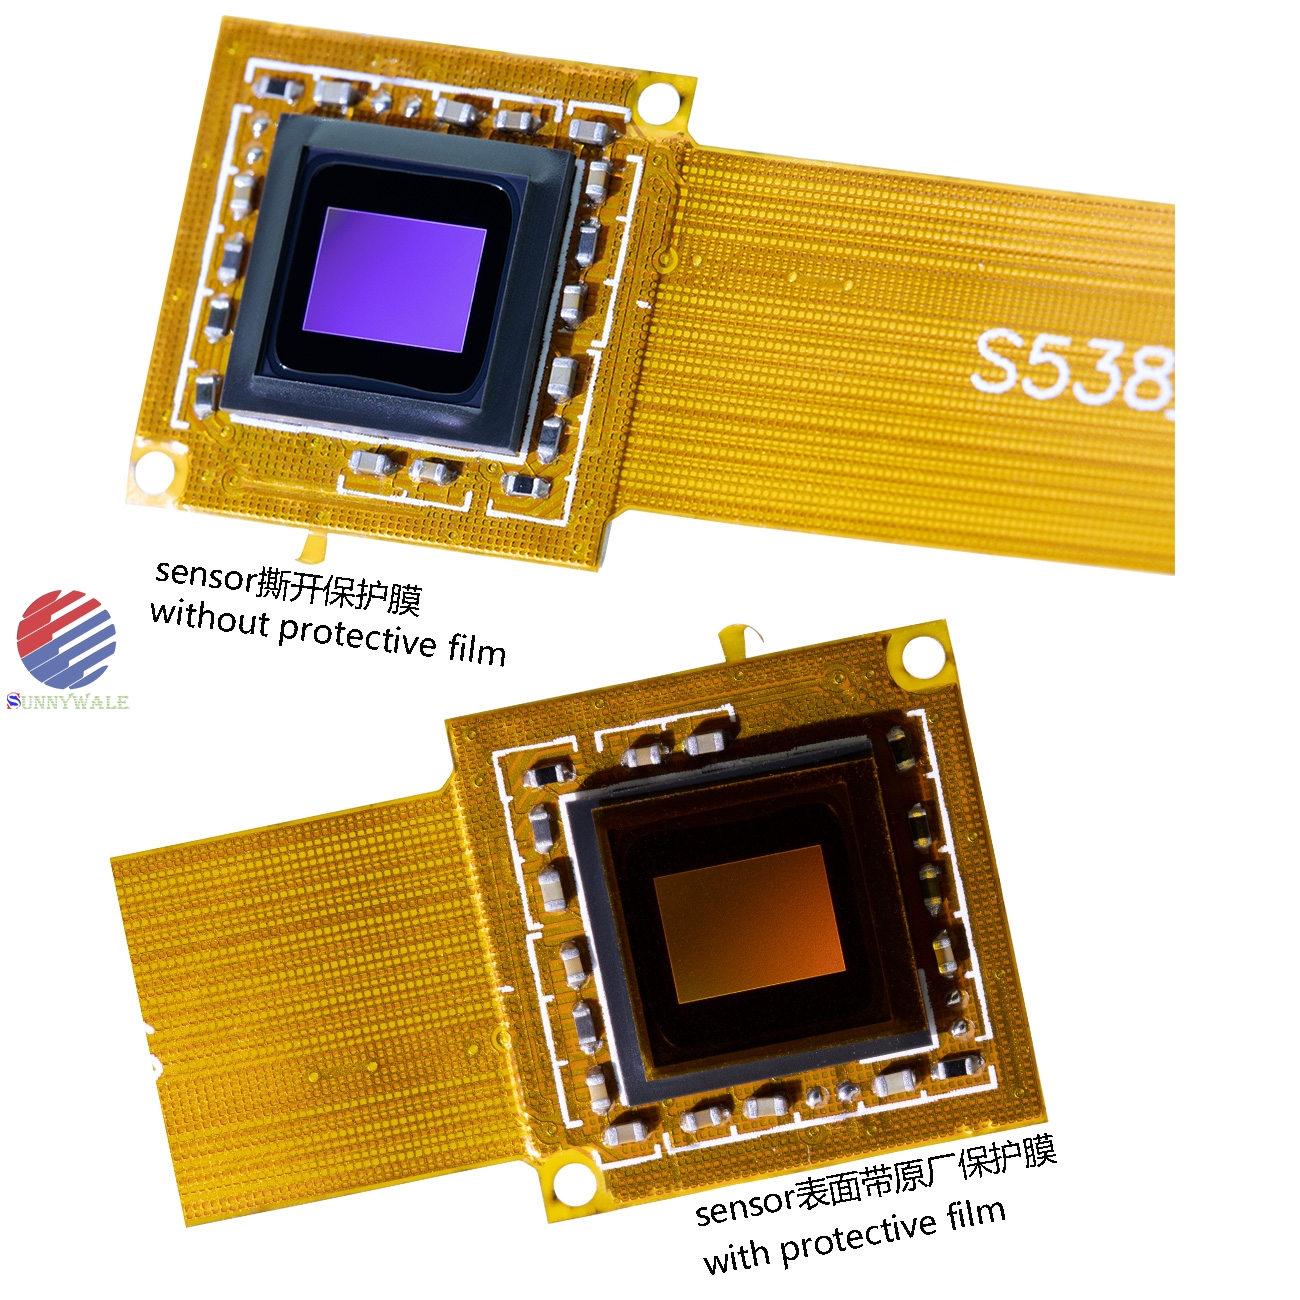 MT9M021IA3XTM, MT9M031，ONSEMI, 1/3-inch, 1.2MP@45fps, low illumination, global shutter exposure, used in industrial cameras, handheld scanning, machine vision, CMOS image sensors